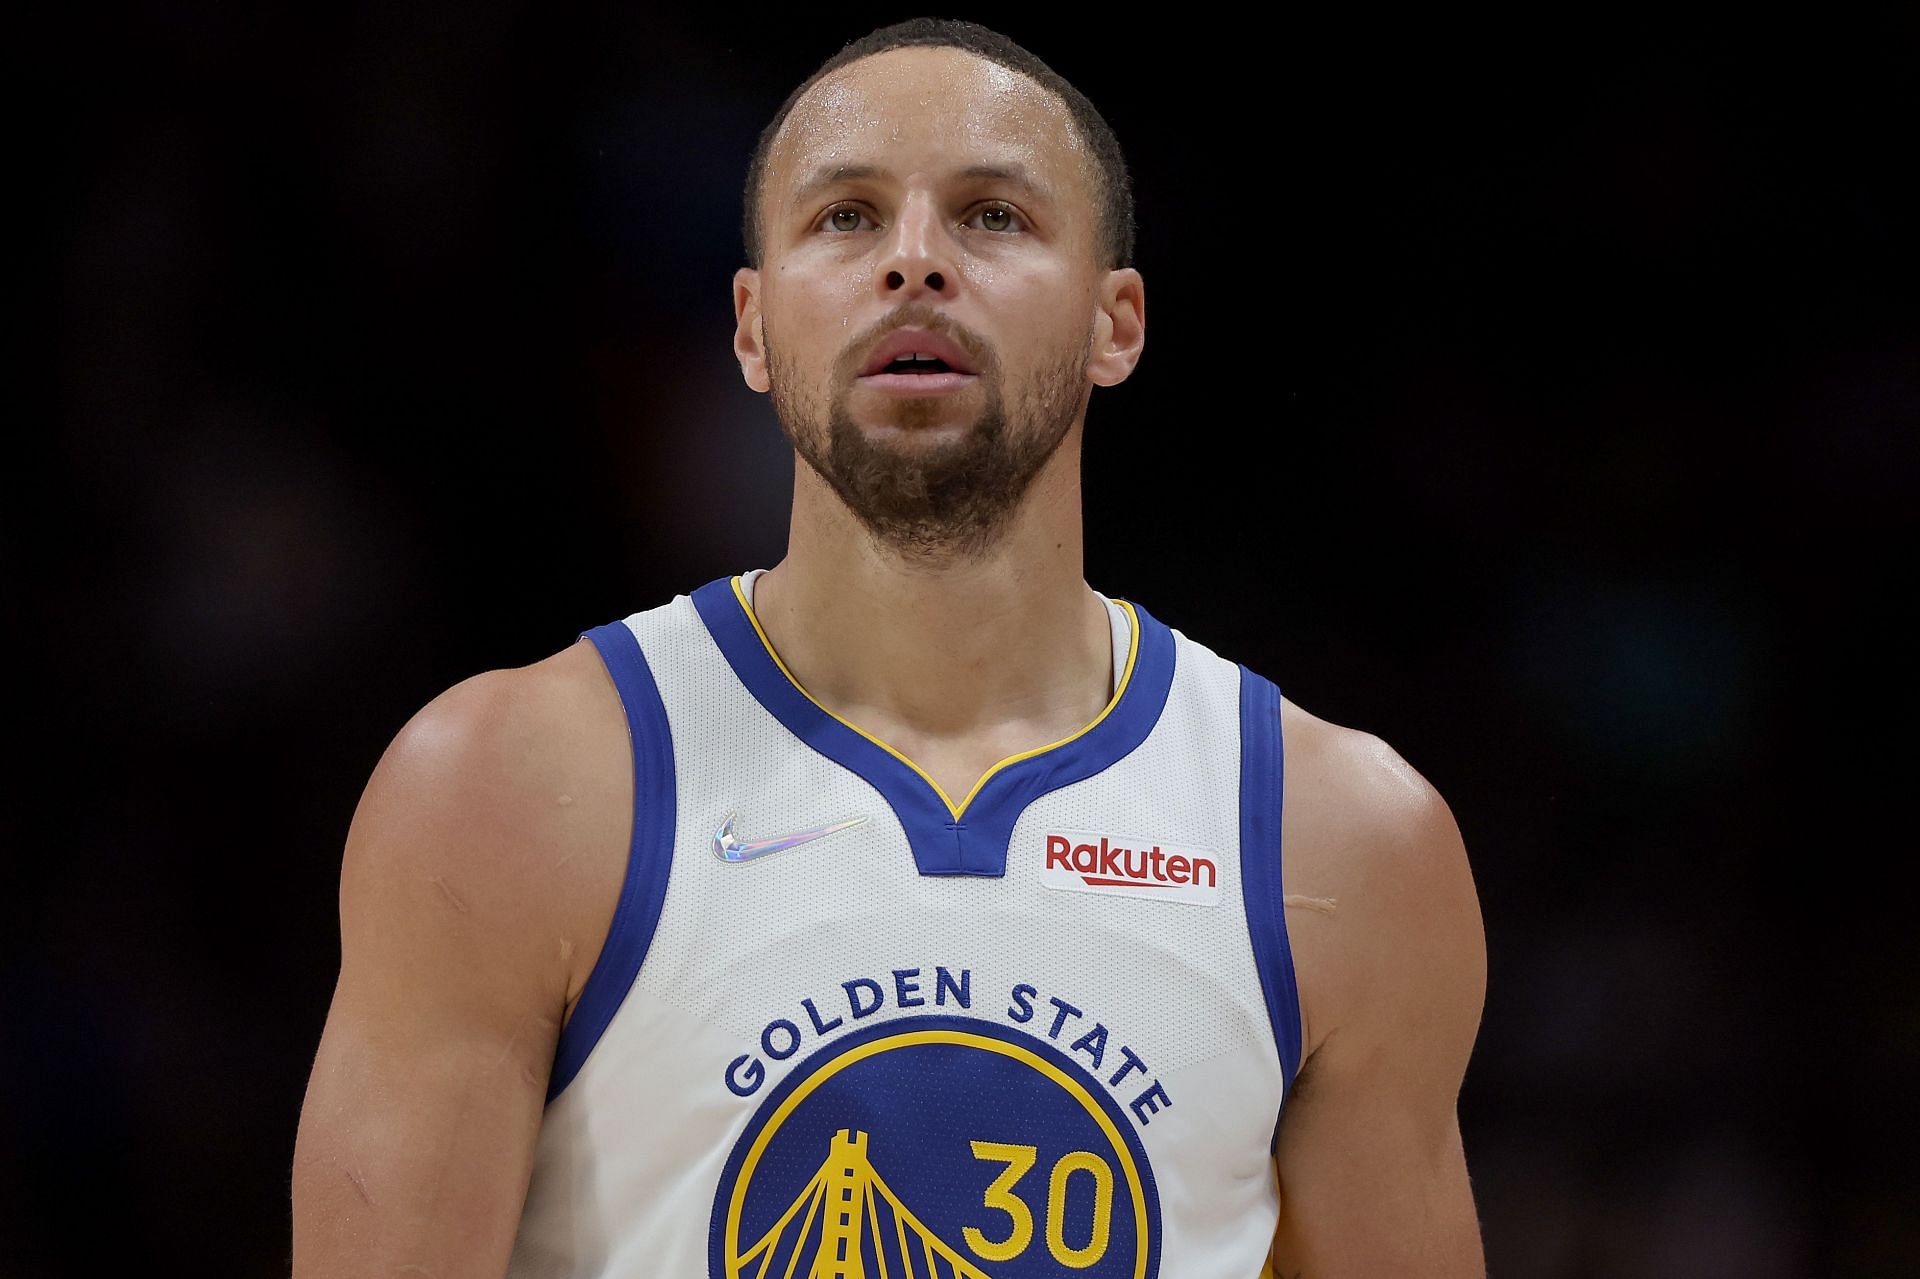 Golden State Warriors superstar Stephen Curry had his second 30-point game of the 2022 NBA Playoffs on Sunday